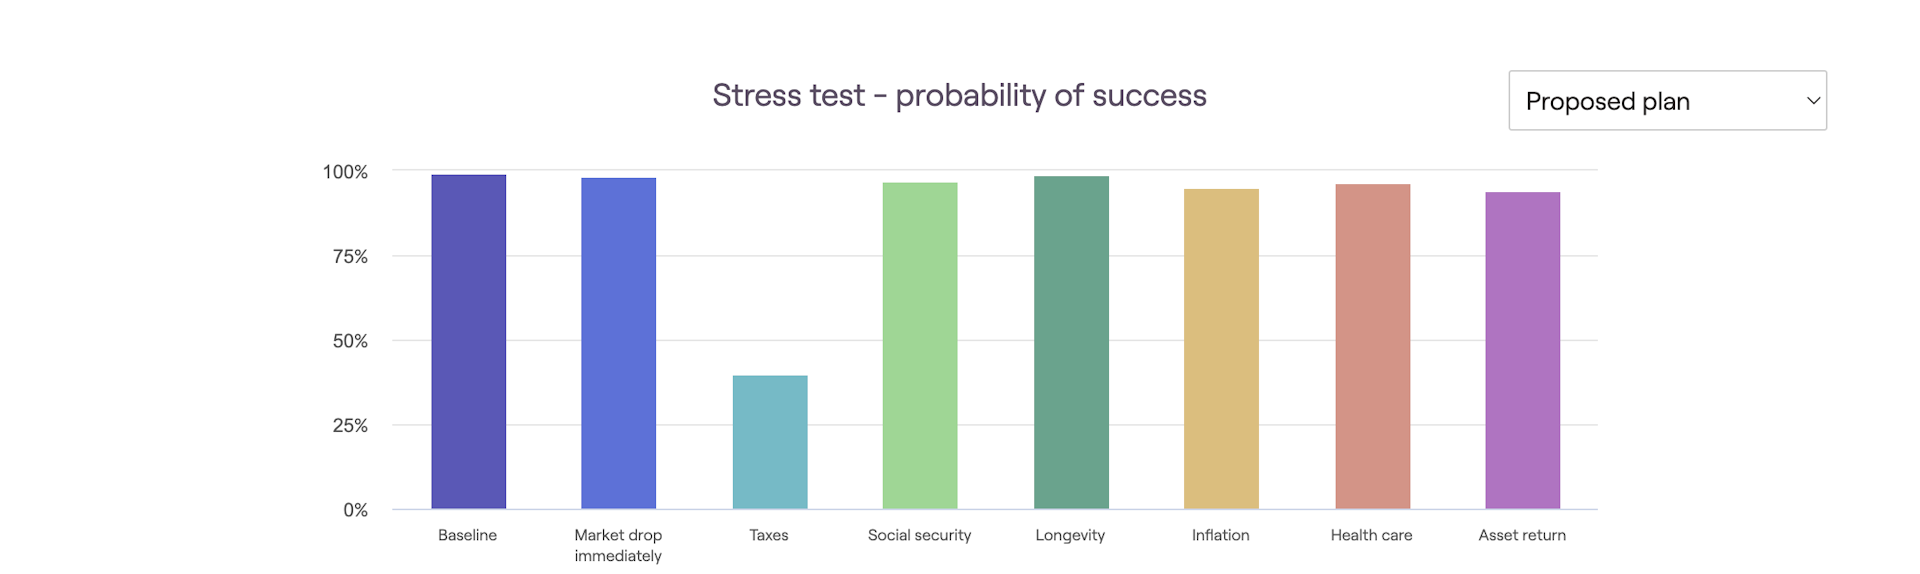 Screenshot showing Stress test probability of success example